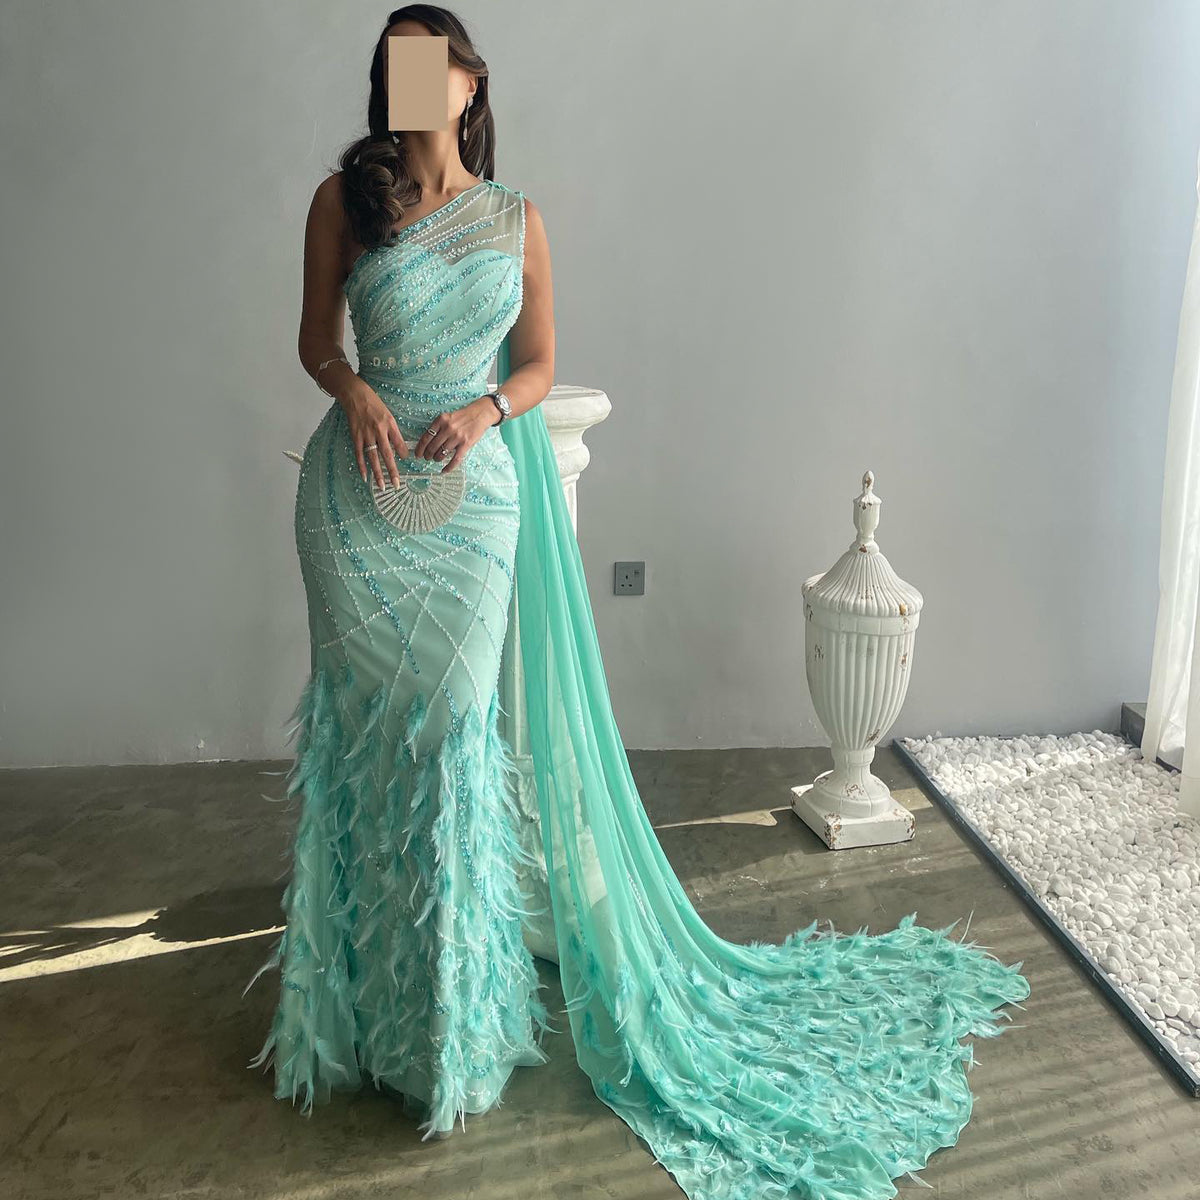 Sharon Said Luxury Feather Turquoise Aqua One Shoulder Mermaid Evening Dress with Cape Train Long Prom Wedding Party Gowns SS498